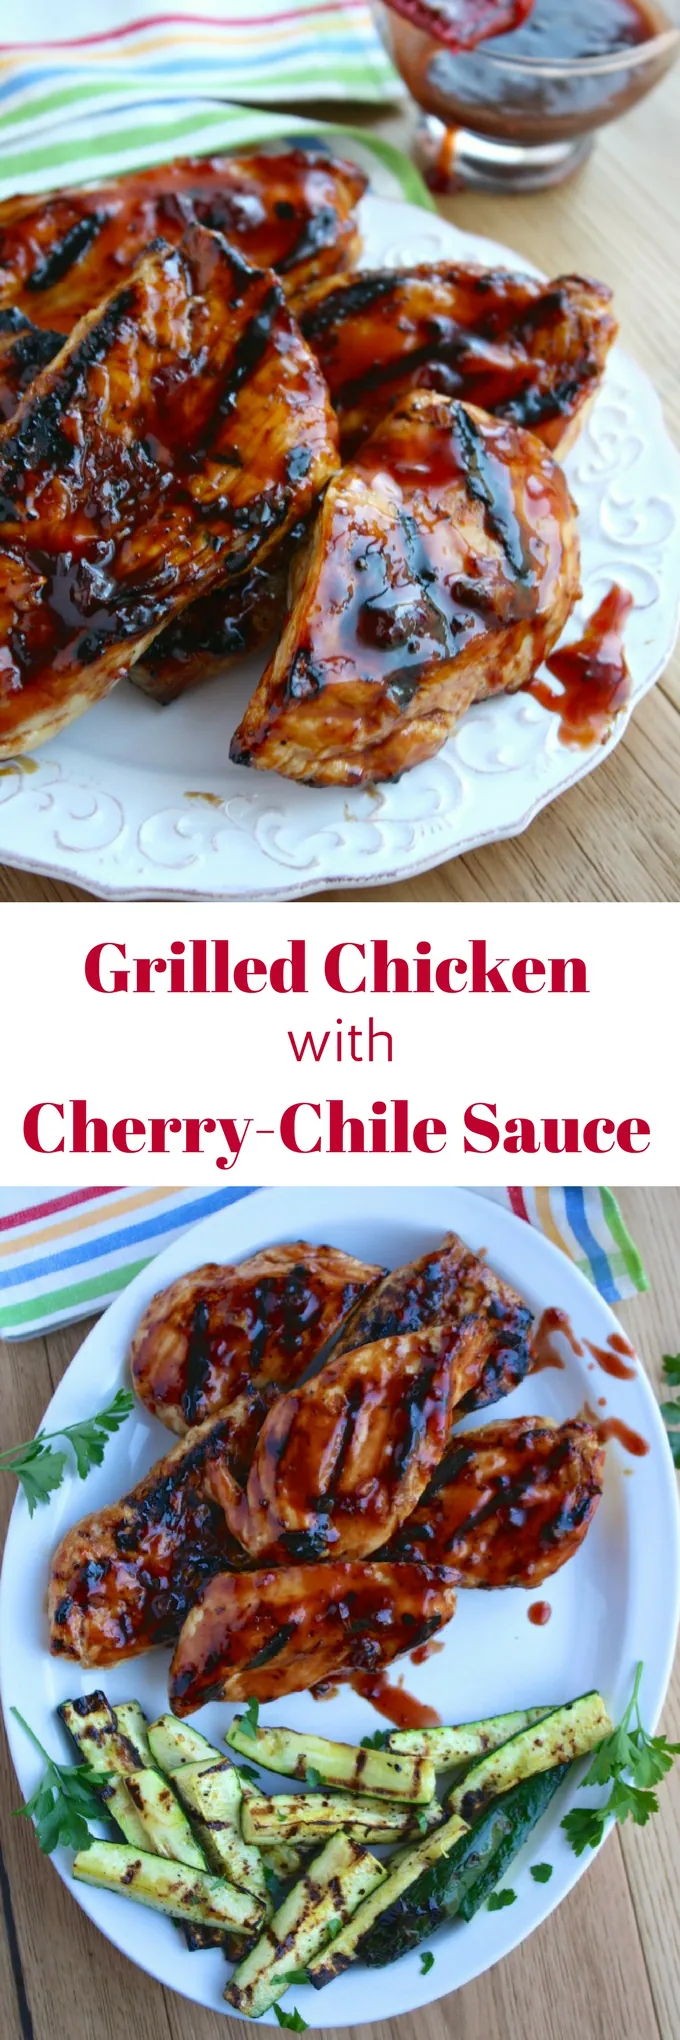 Grilled Chicken with Cherry-Chile Sauce is a dish to make before the grilling season ends! You'll love the big flavor in this dish.